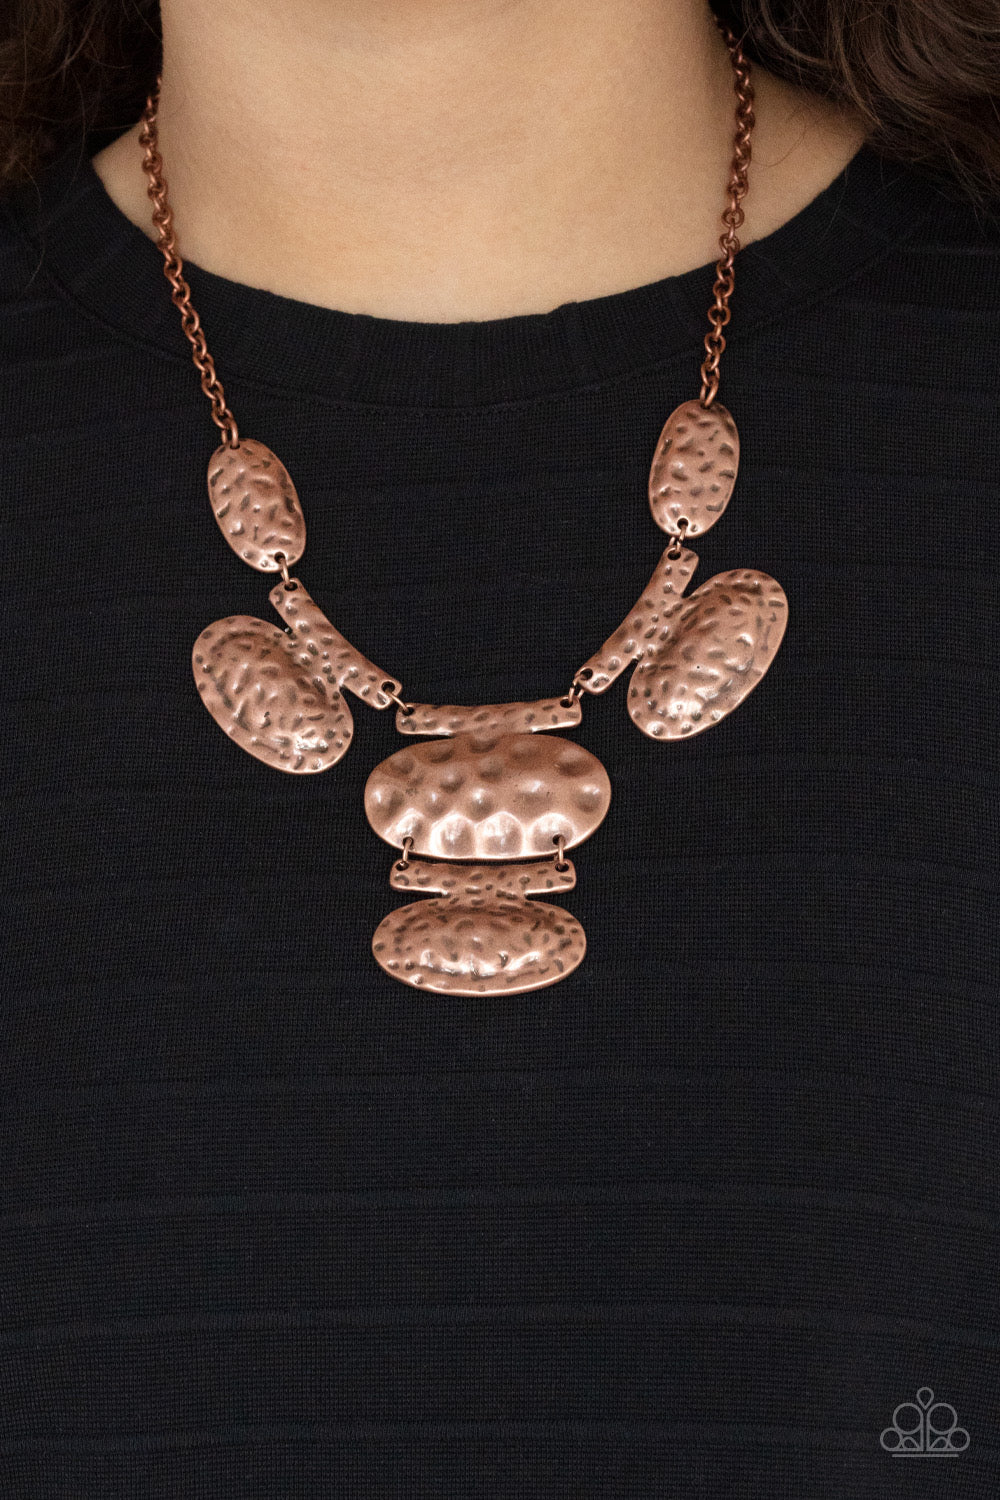 Gallery Relic - Copper Necklace